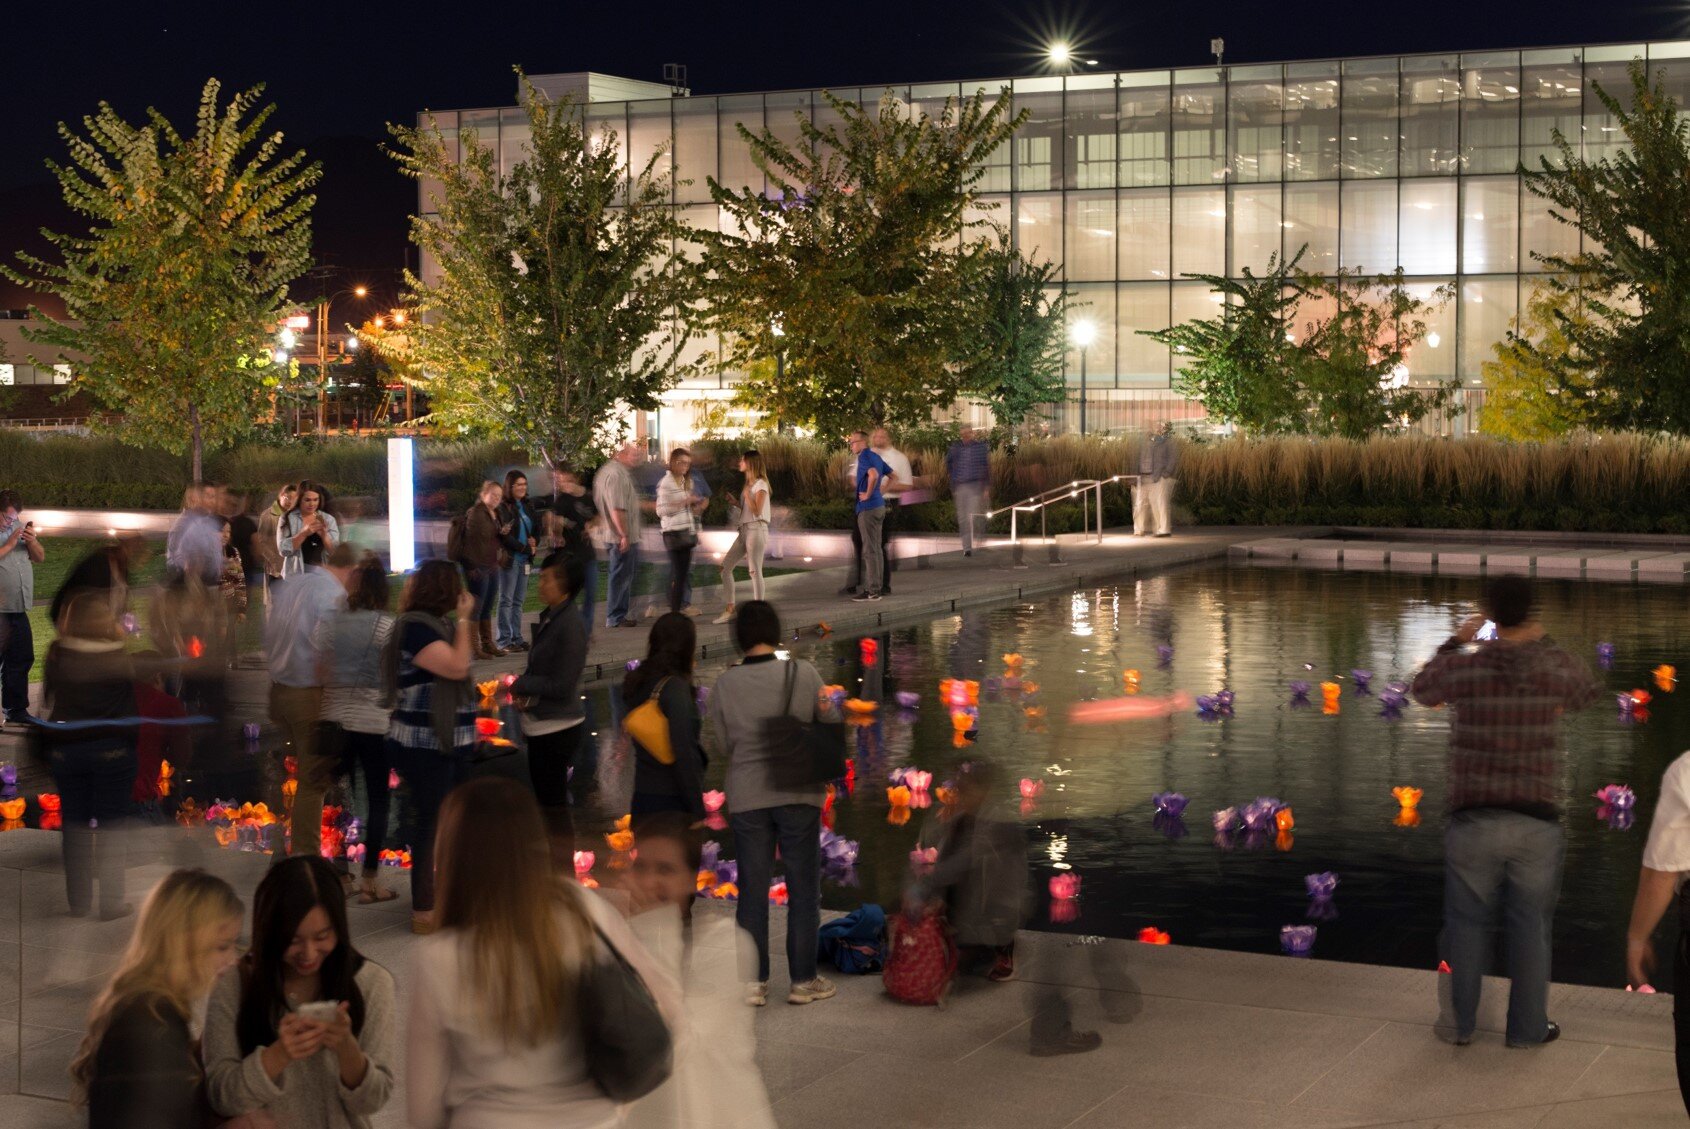  The campus is frequently used to celebrate the international Nu Skin community during day-into-night events. 